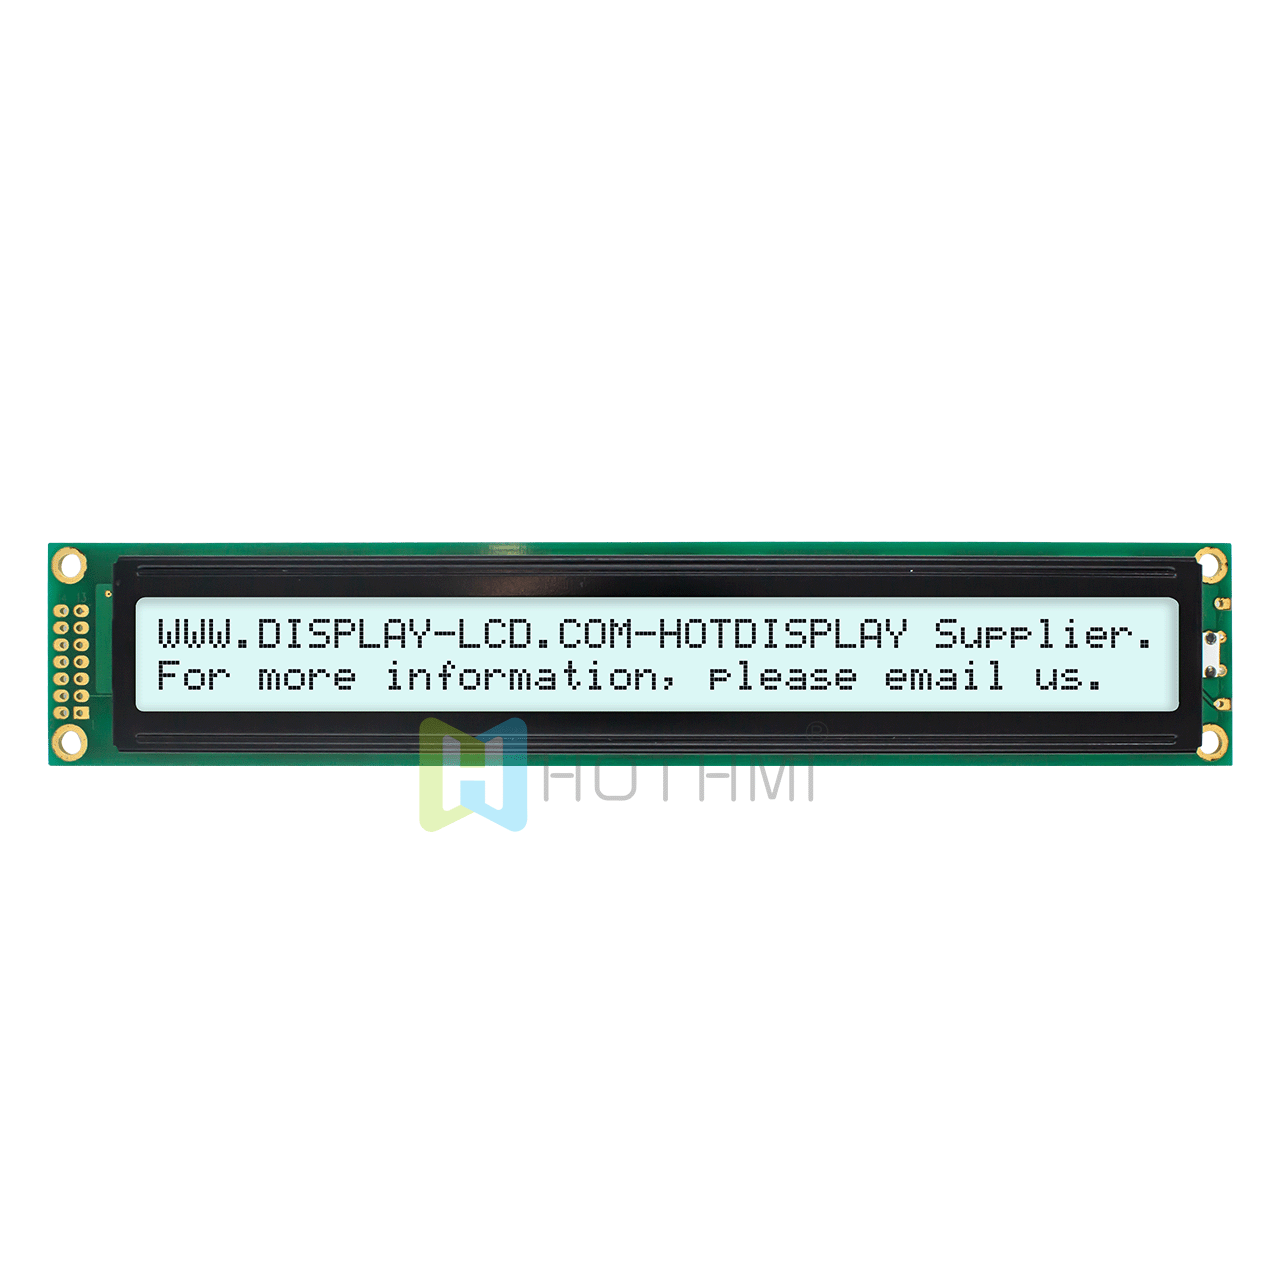 5.0v | 2X40 character monochrome LCD display module | FSTN positive display | with white backlight | Arduino display | white background with gray characters